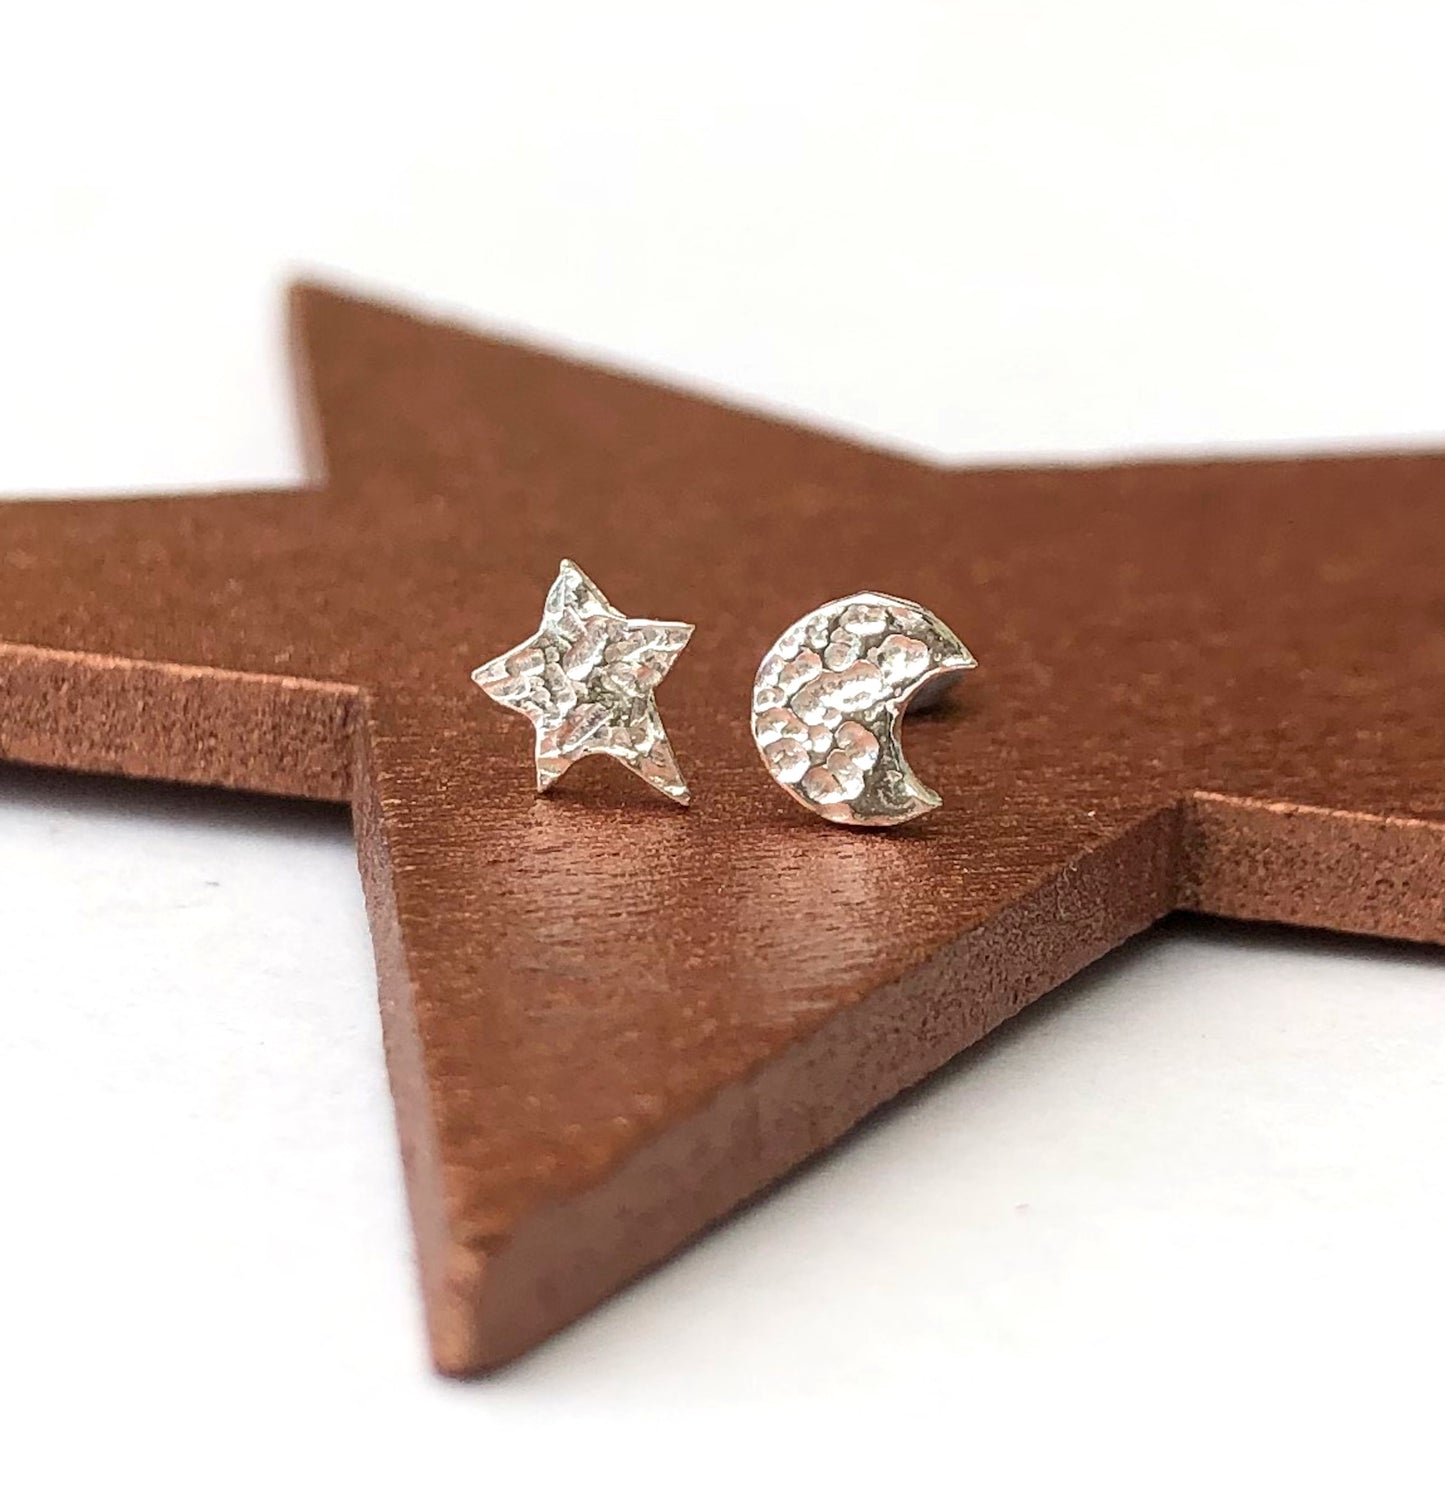 Sterling Silver Mini Moon And Star Earrings, Dainty Celestial Mismatched Stud